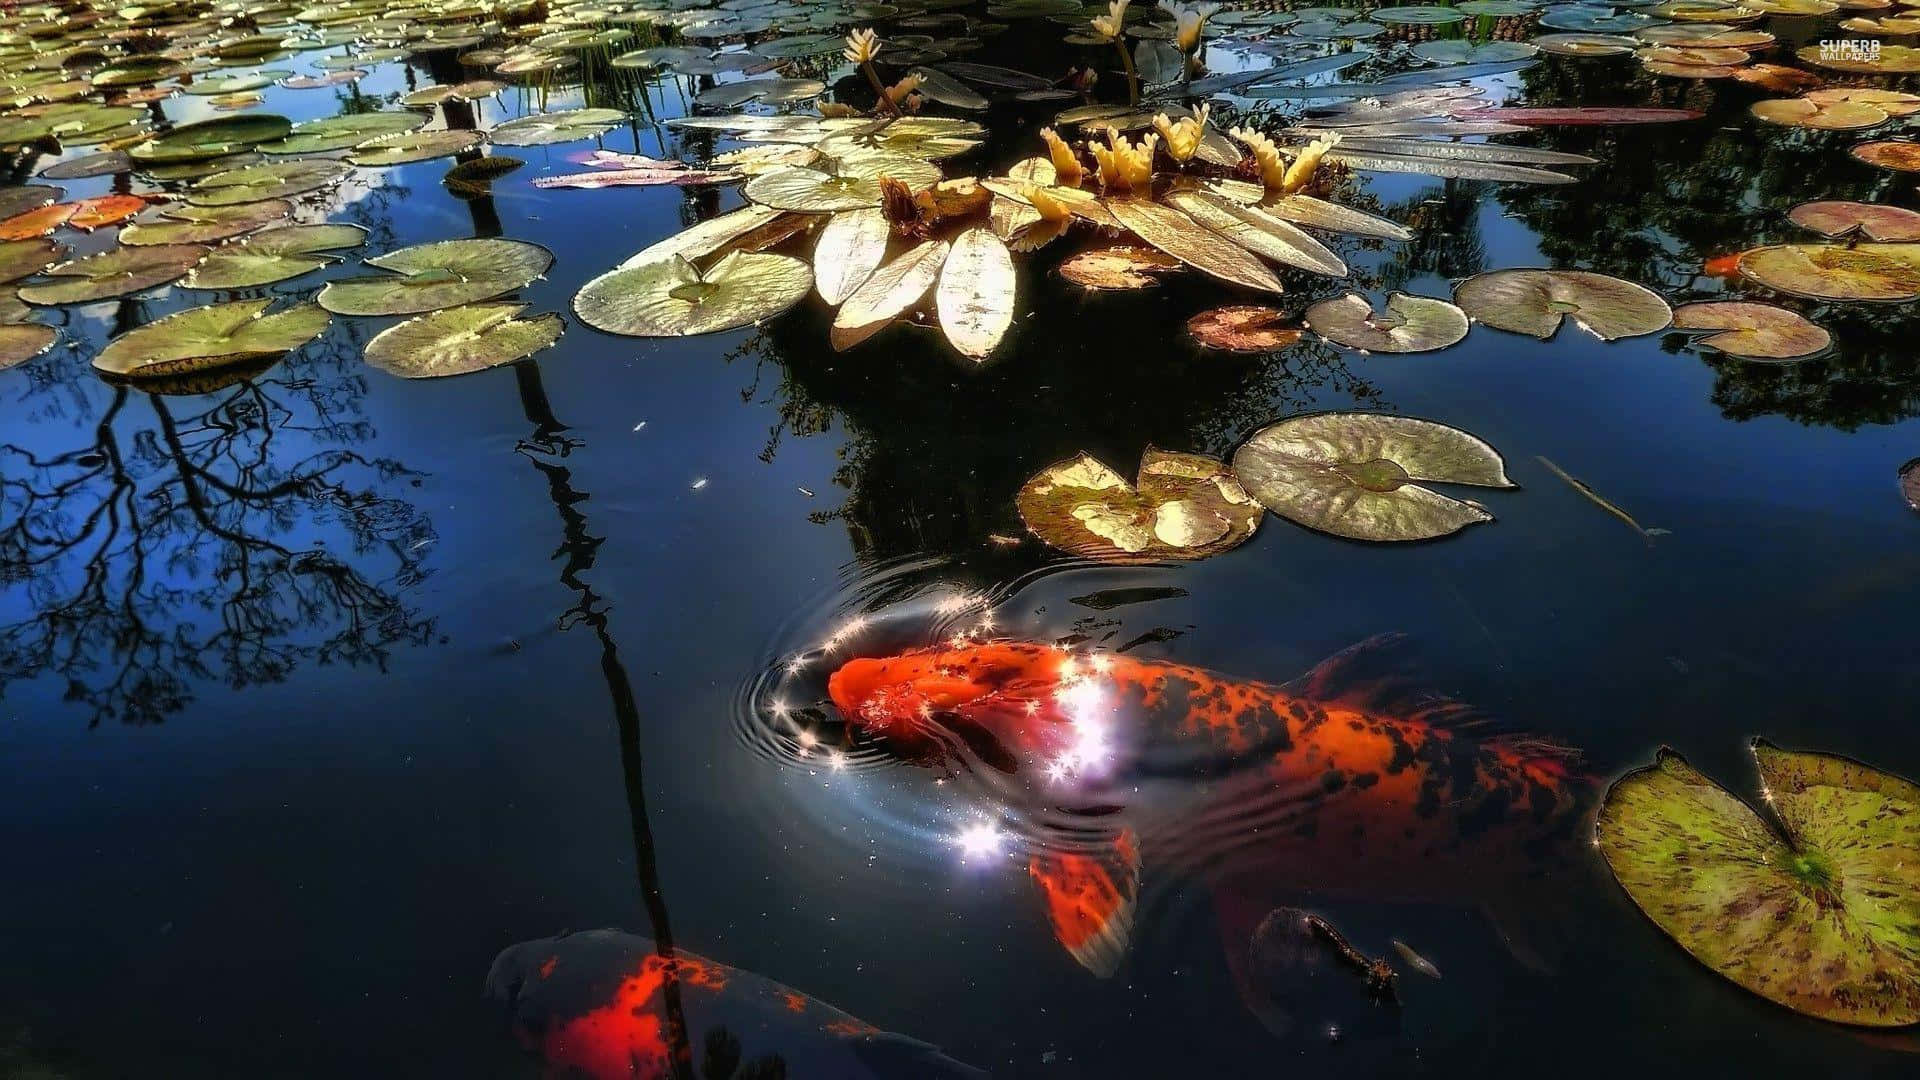 Koi Pond With Lily Pads And A Fish